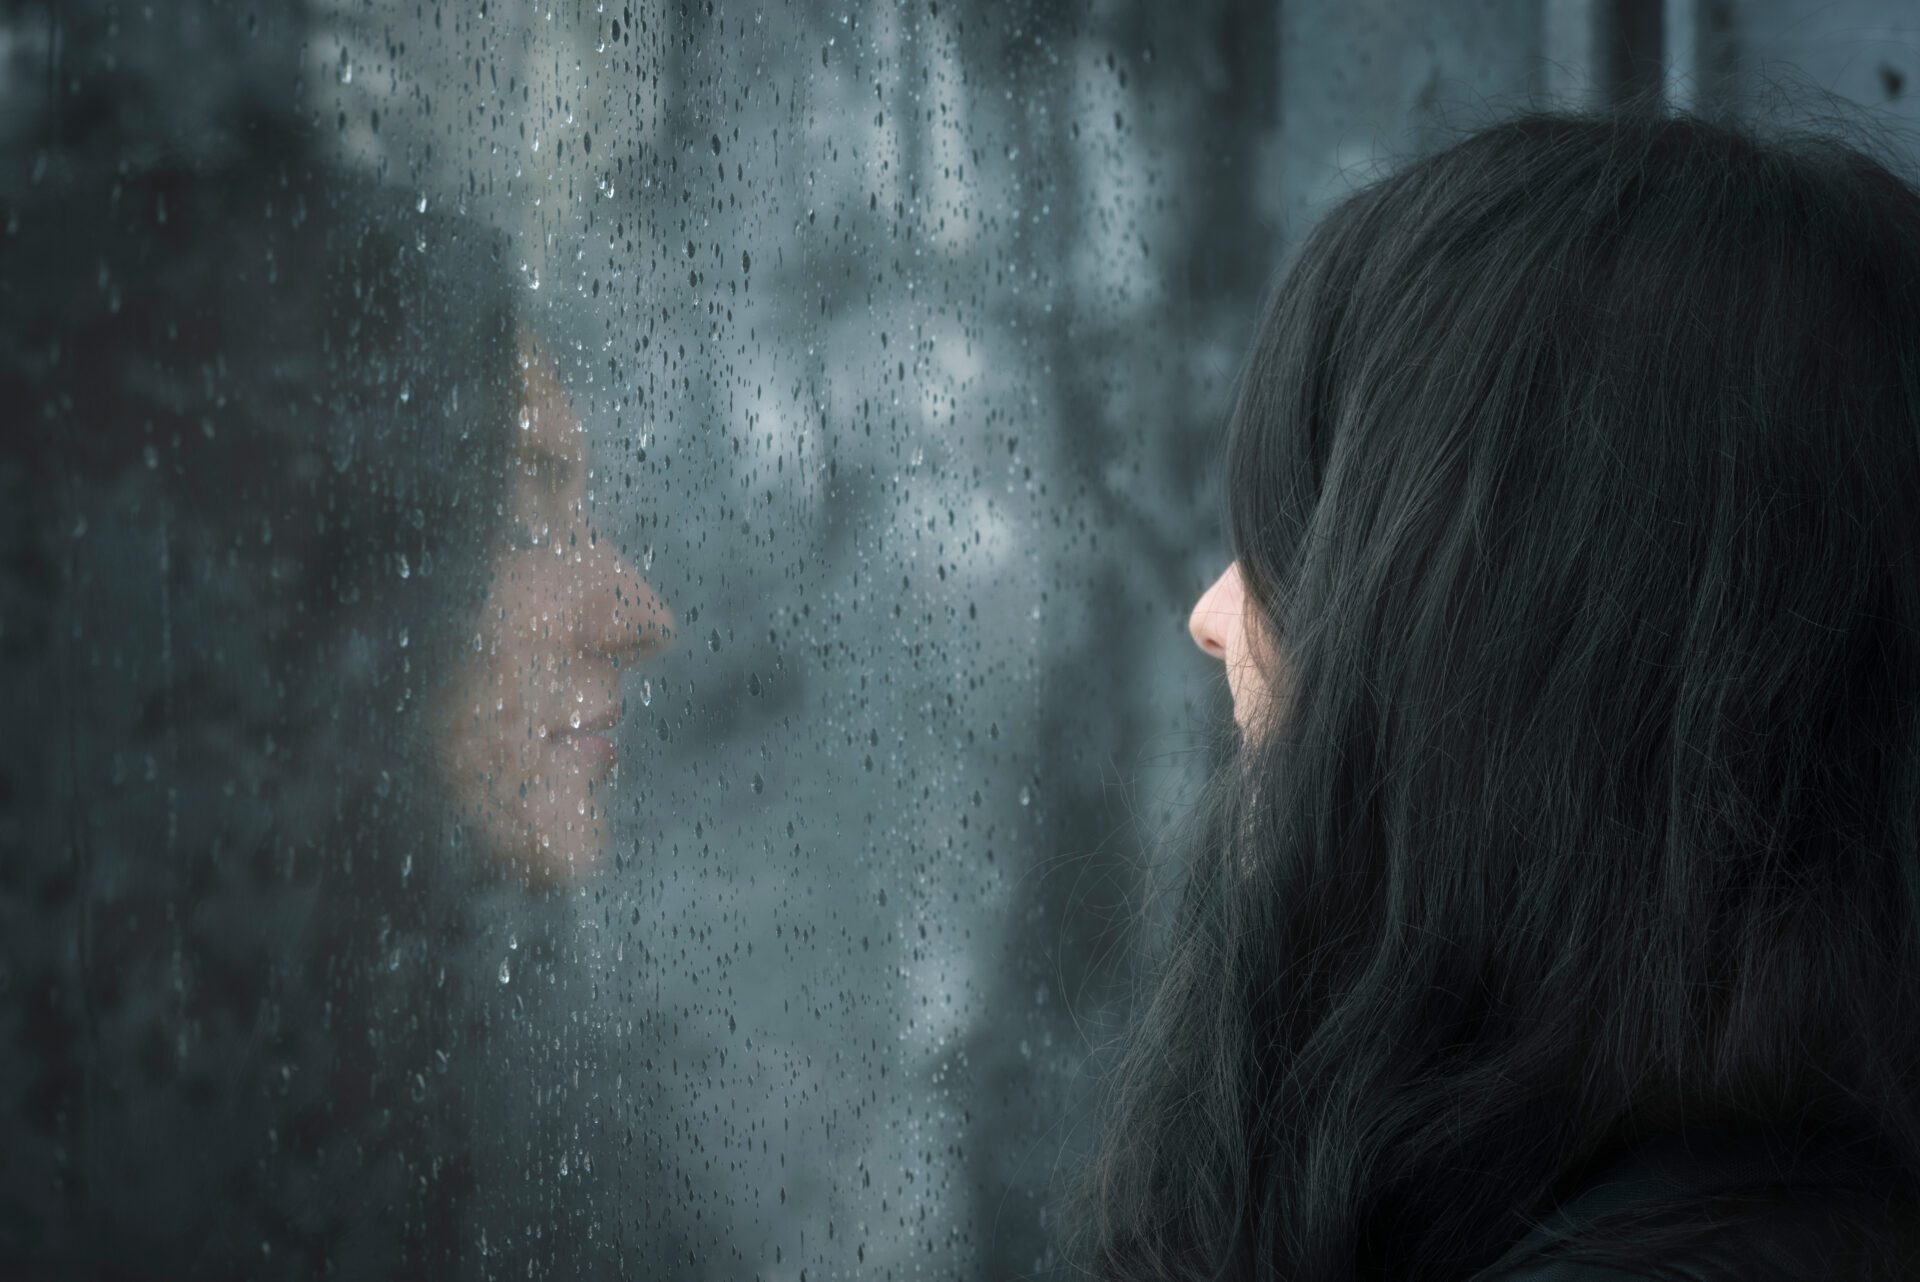 Profile image of a young brunette woman with closed eyes thinking  in front of rainy window